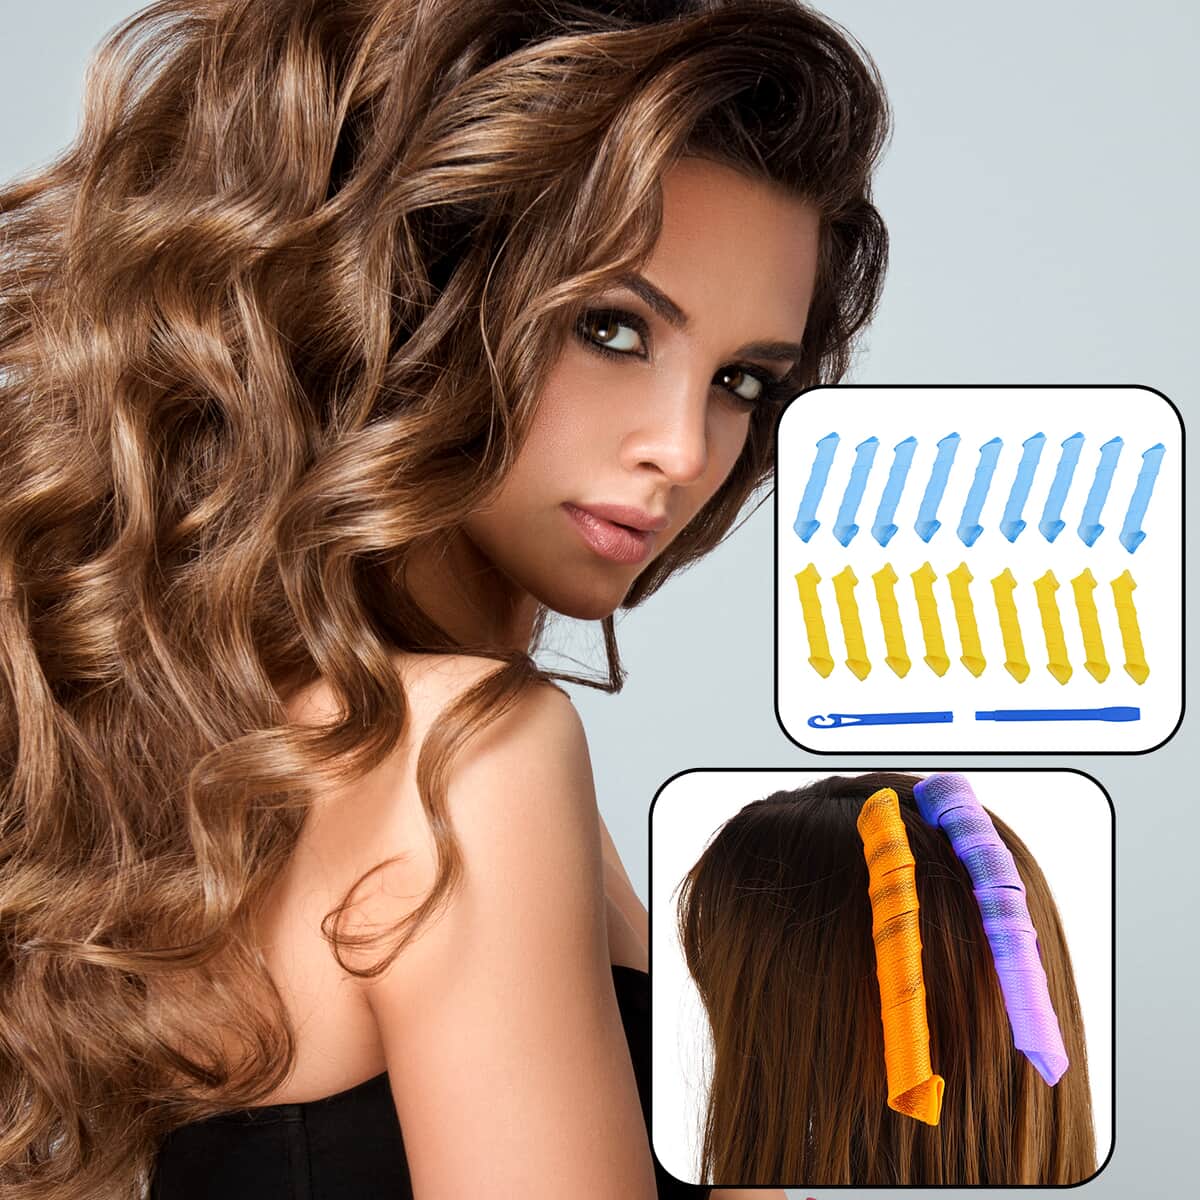 Yellow and Blue 18pcs Magic Leverage with 2pcs Styling Hooks for Curling Hair image number 1